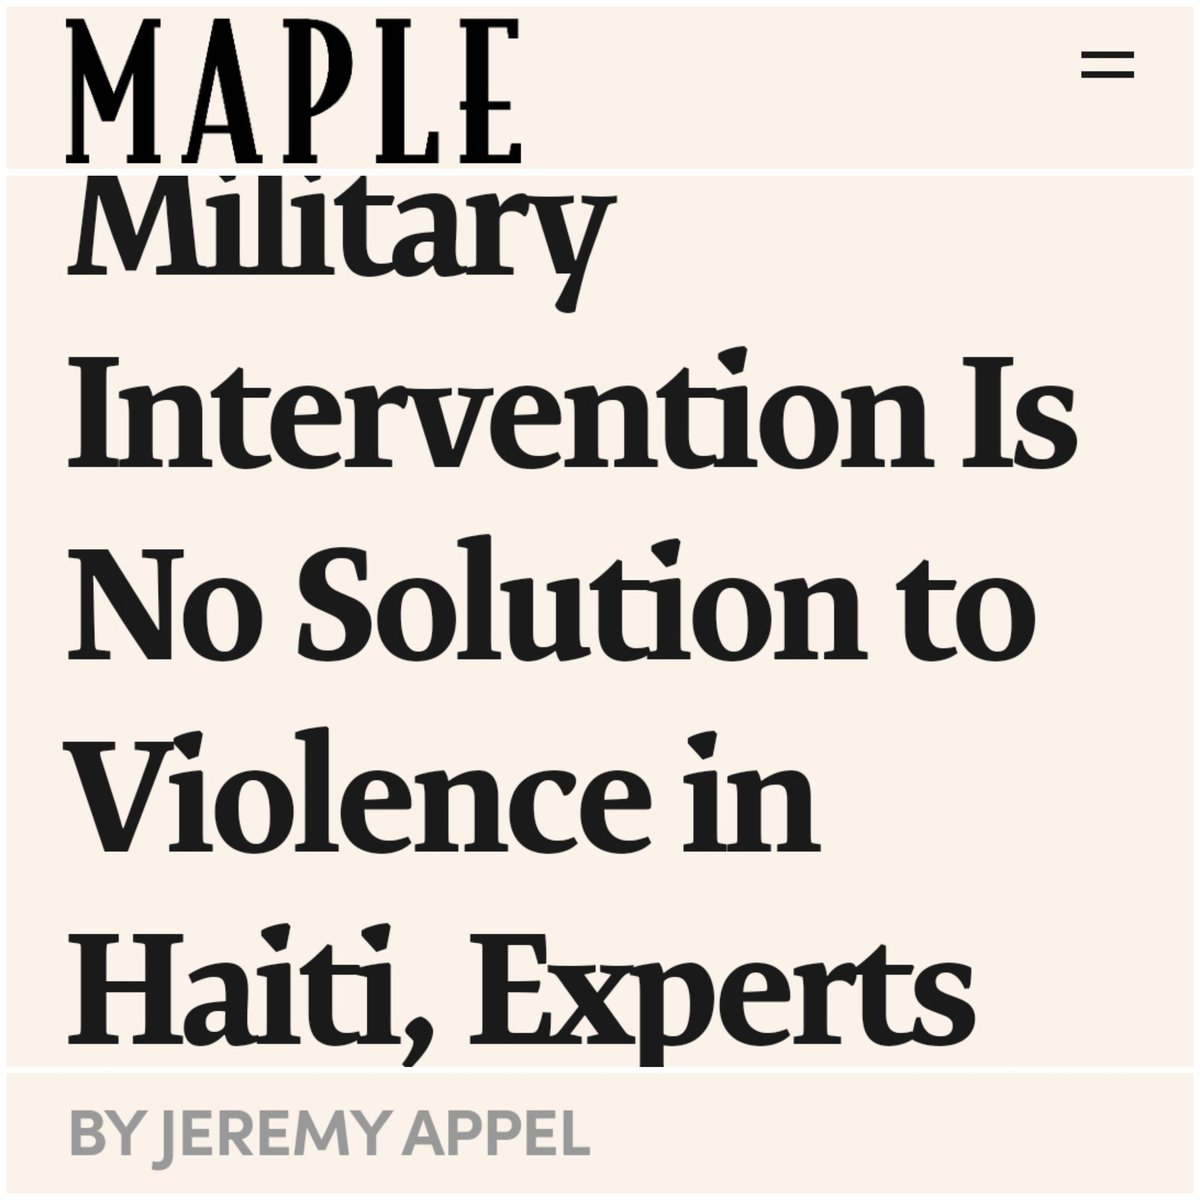 Writing @readthemaple ⛱@bigshinytakes⛱ + 🗯@ForgCornPod🗯 co-host @JeremyAppel1025 explains why Canada/US armoured vehicles in Haiti & making potential plans for further military intervention to prop up the country’s unelected government is a bad idea: readthemaple.com/military-inter…